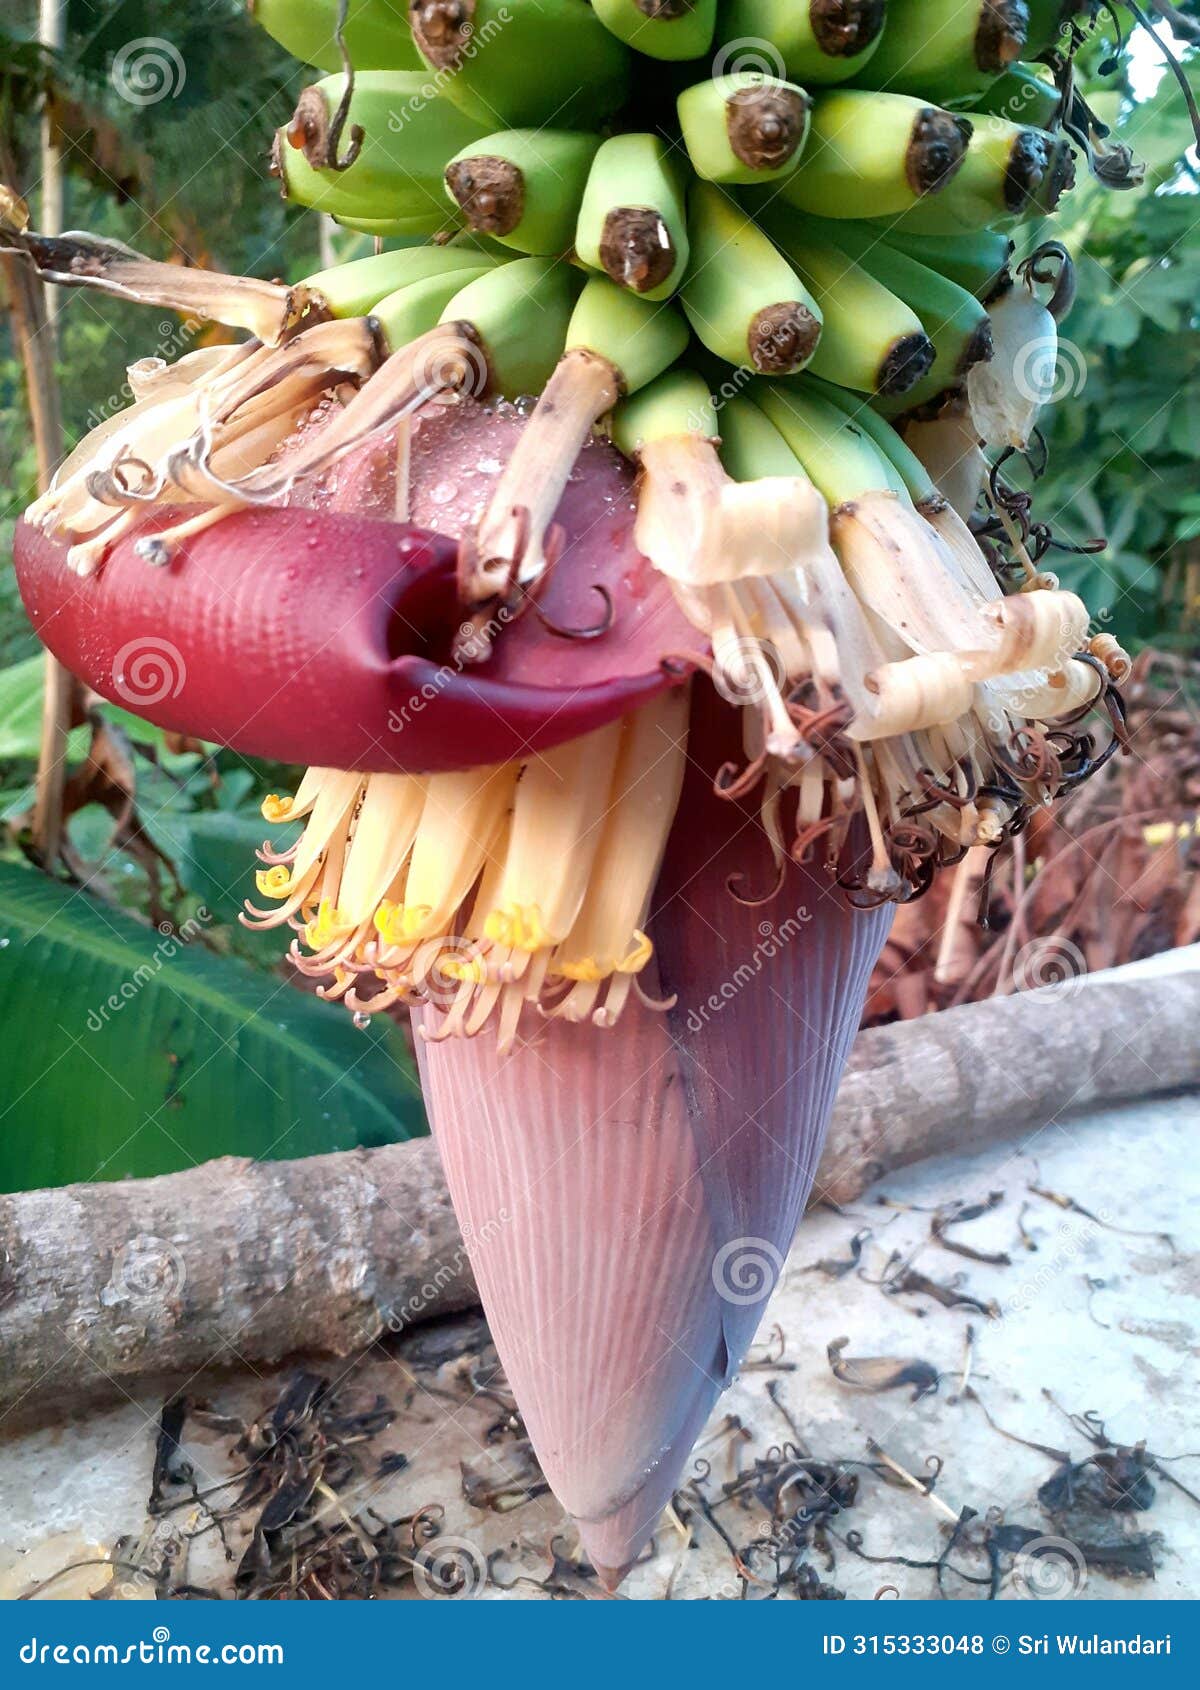 banana blossom. it is usually used for various types of cooking, some make it into shredded meat